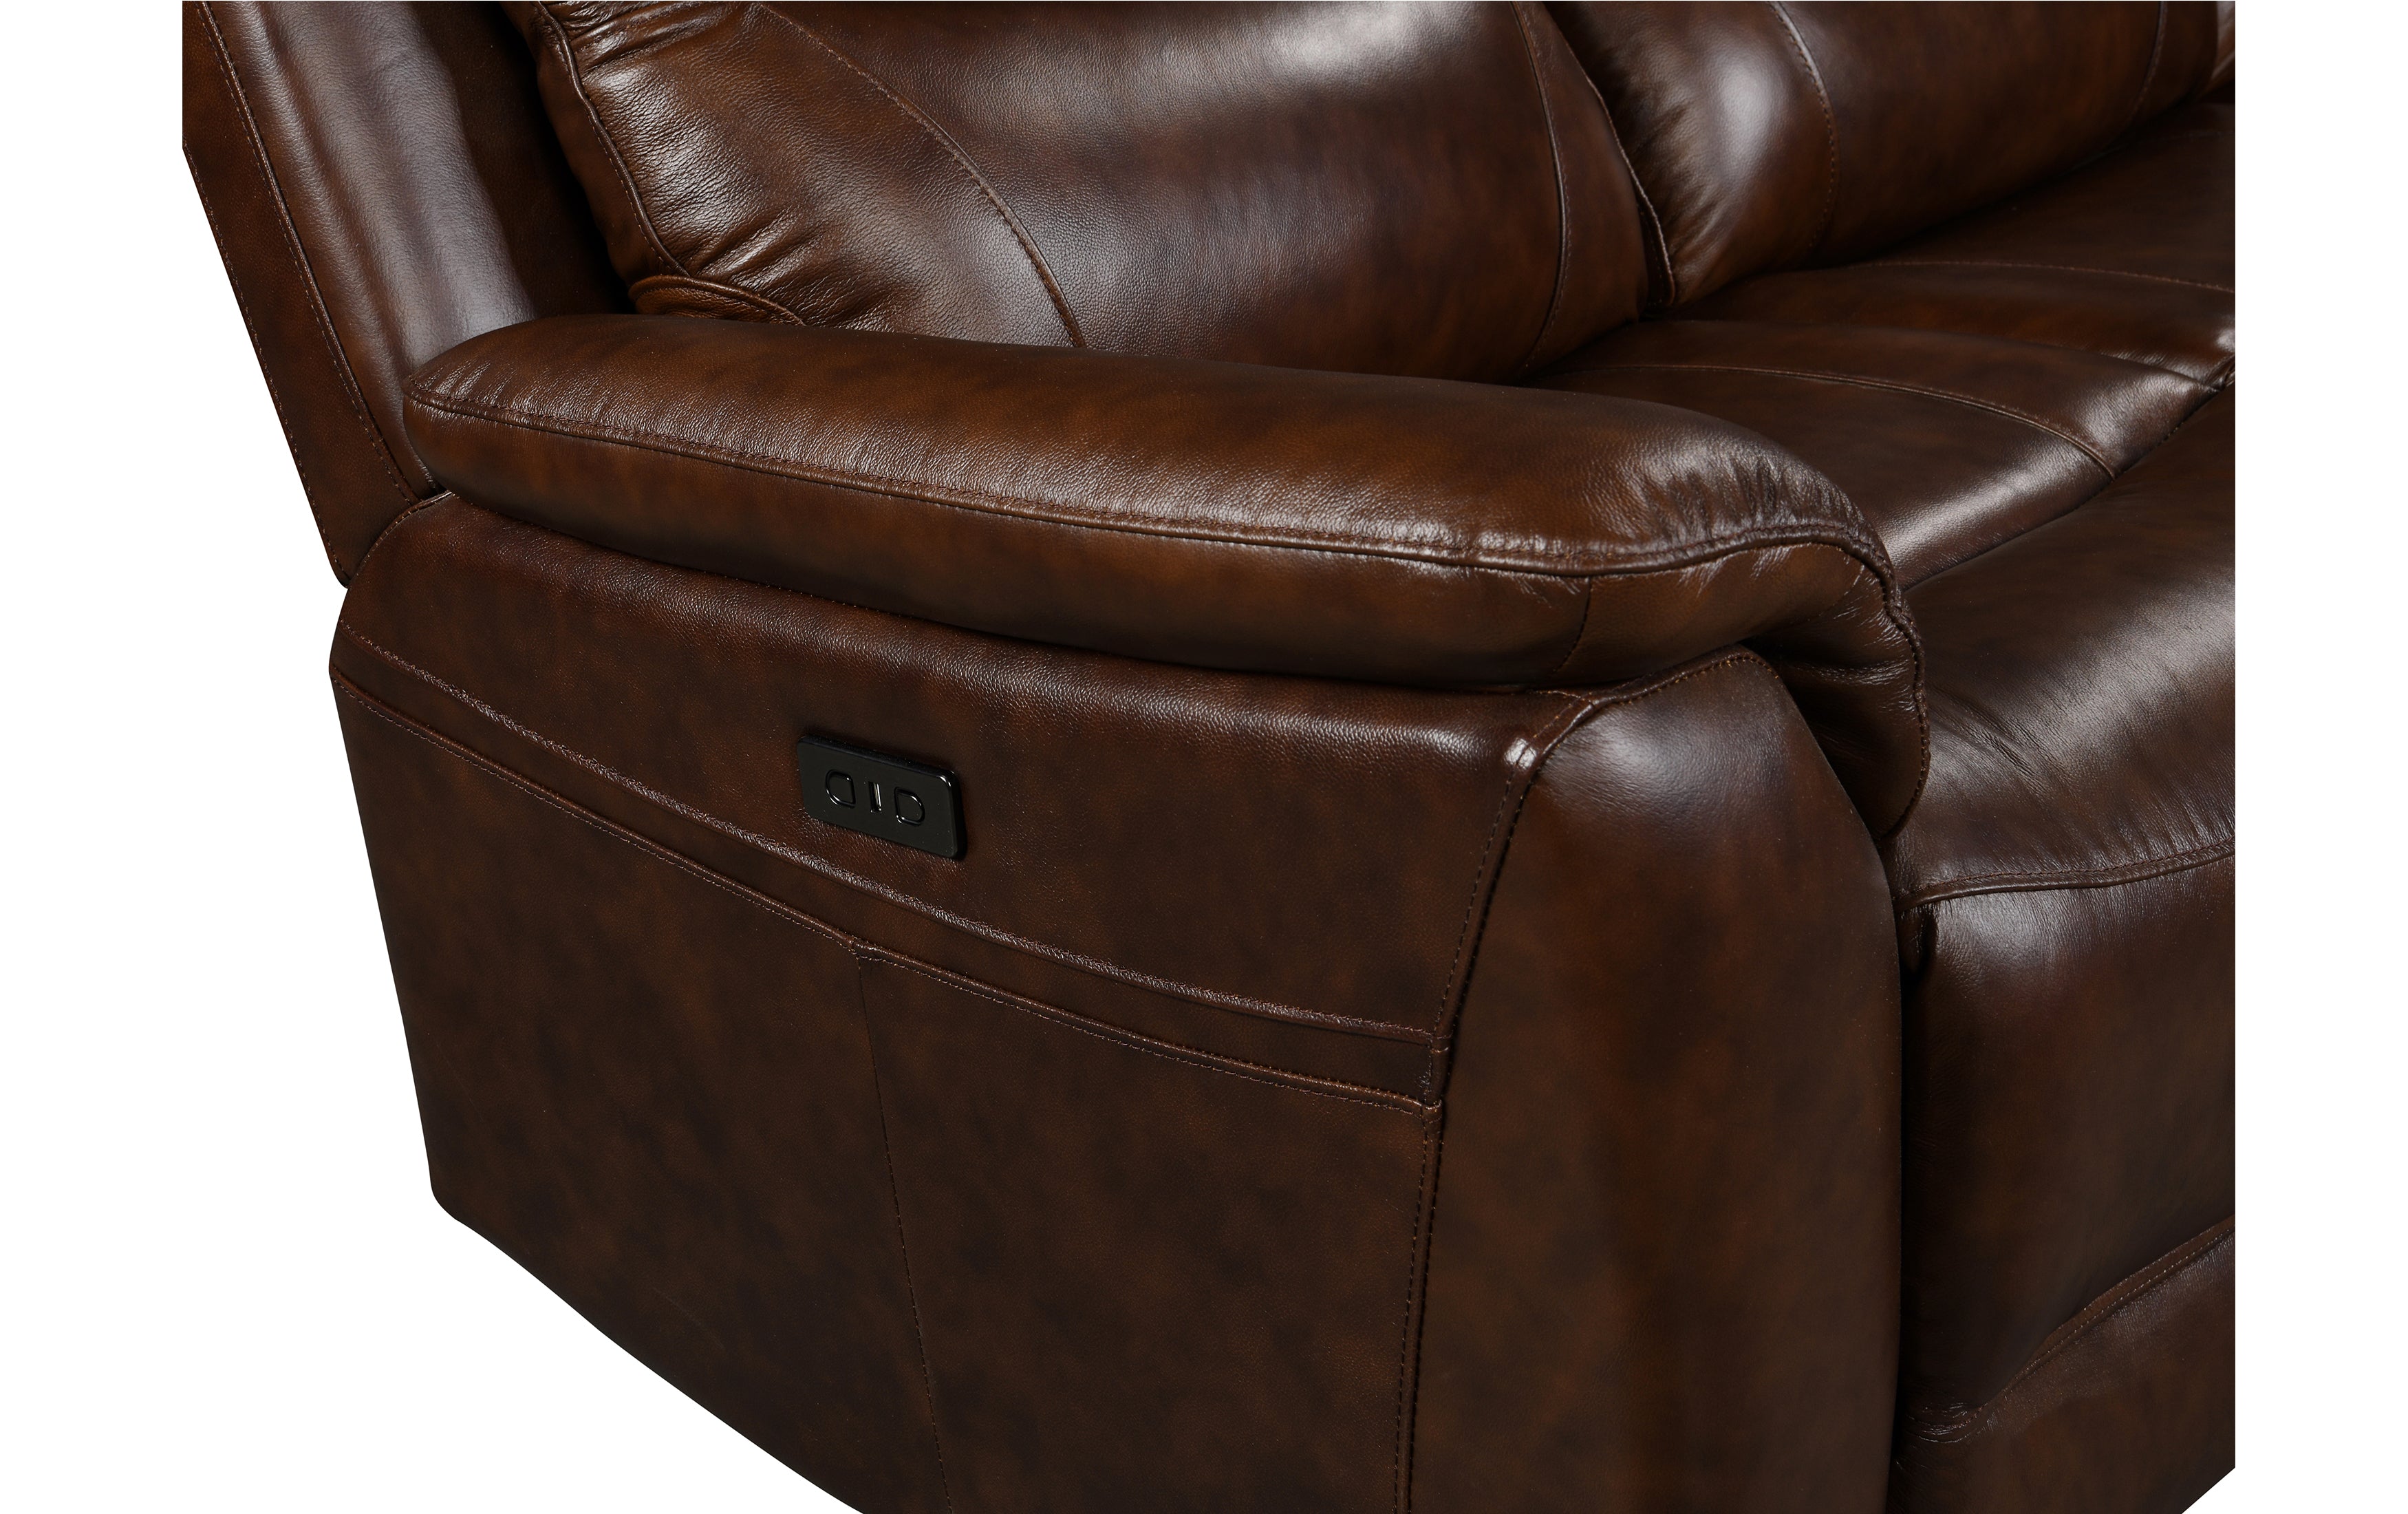 Palermo Leather 3 Seater Sofa with Power Recliner